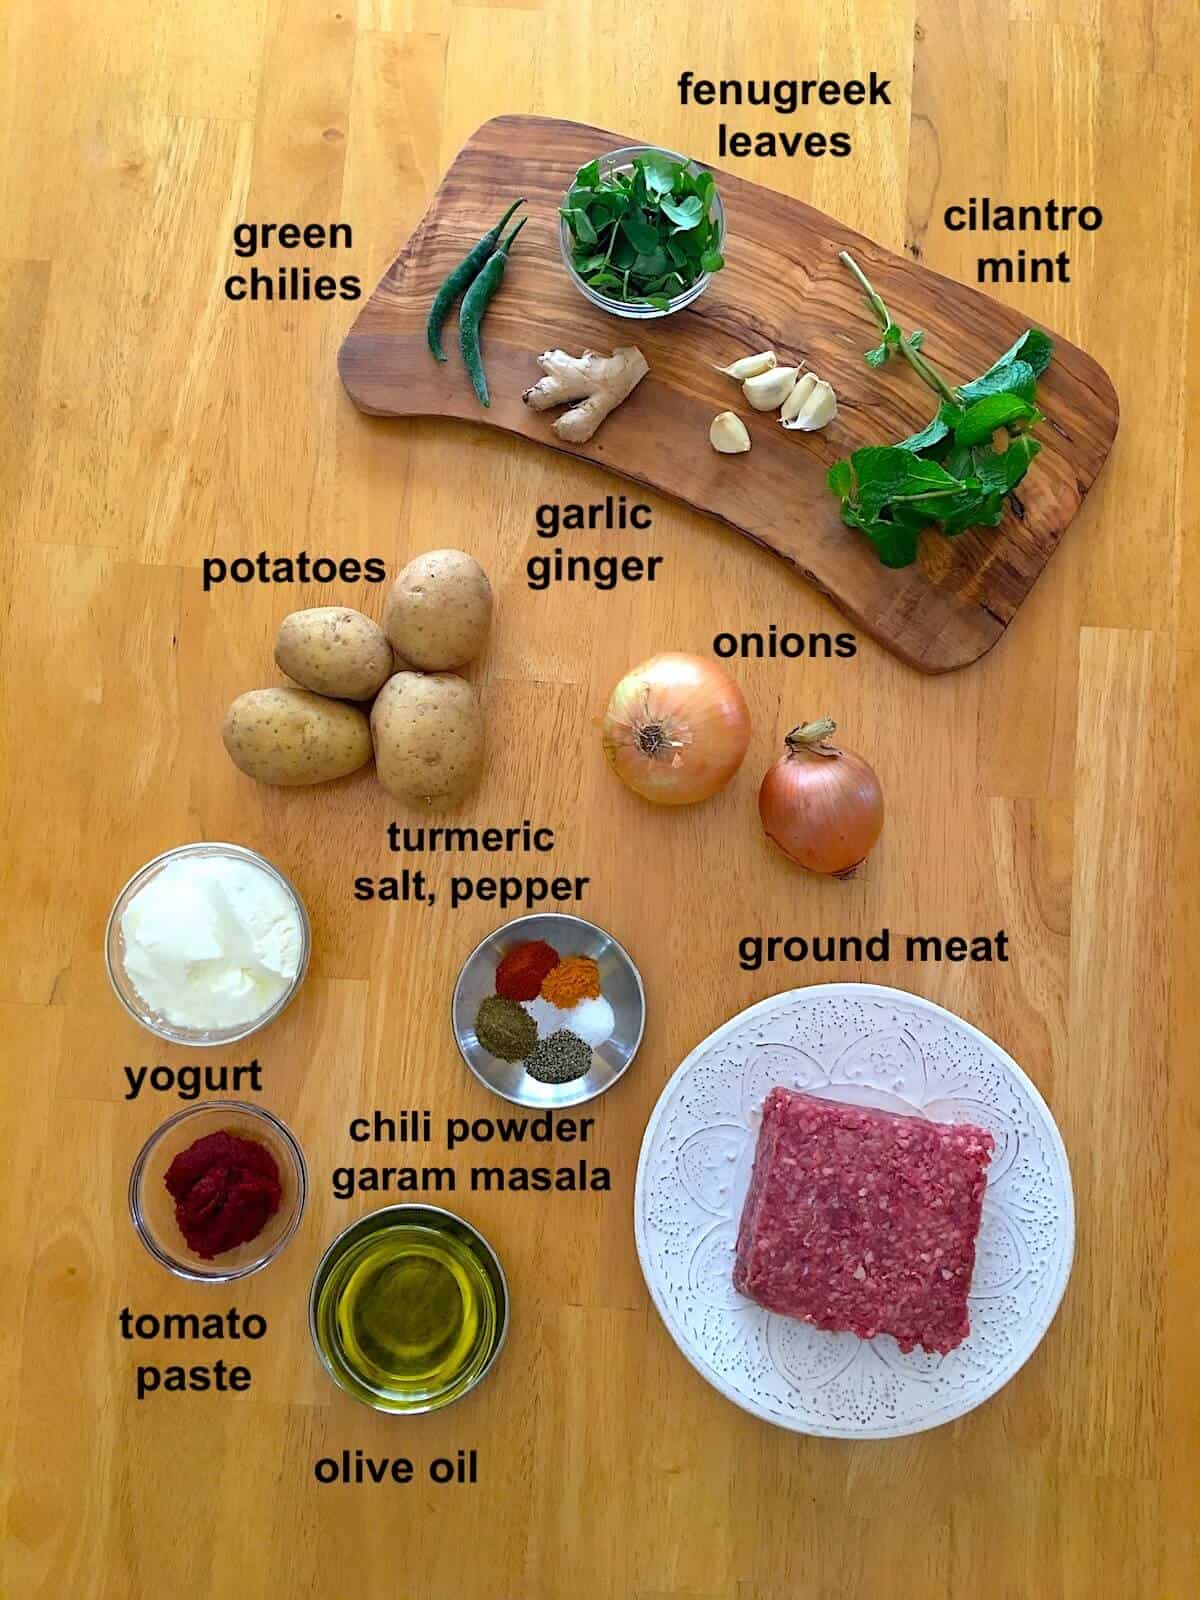 Ingredients needed for the recipe.